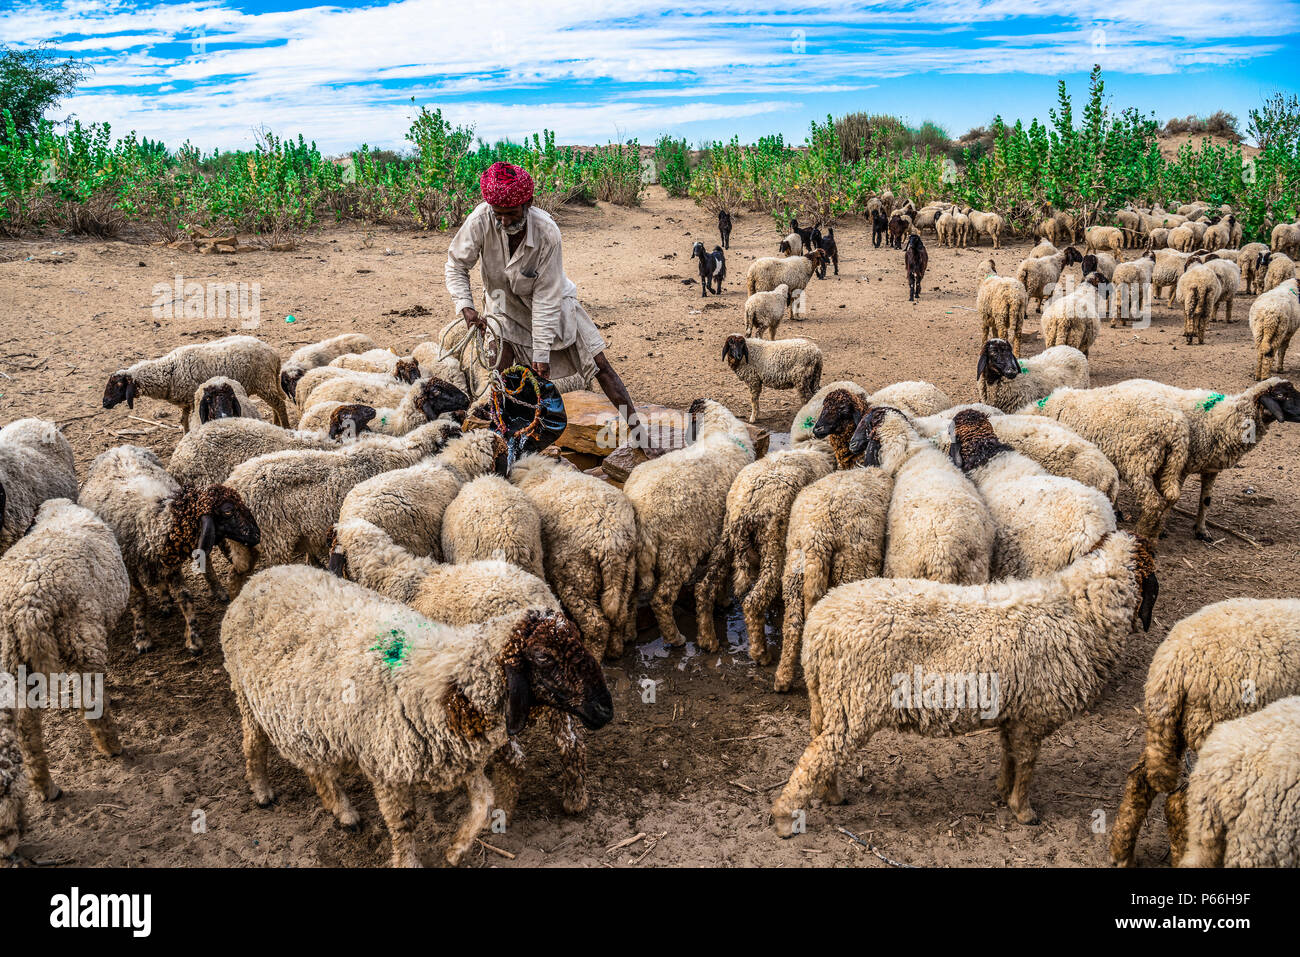 INDIA RAJASTHAN Thar desert A shepherd at a well with his flock Stock Photo